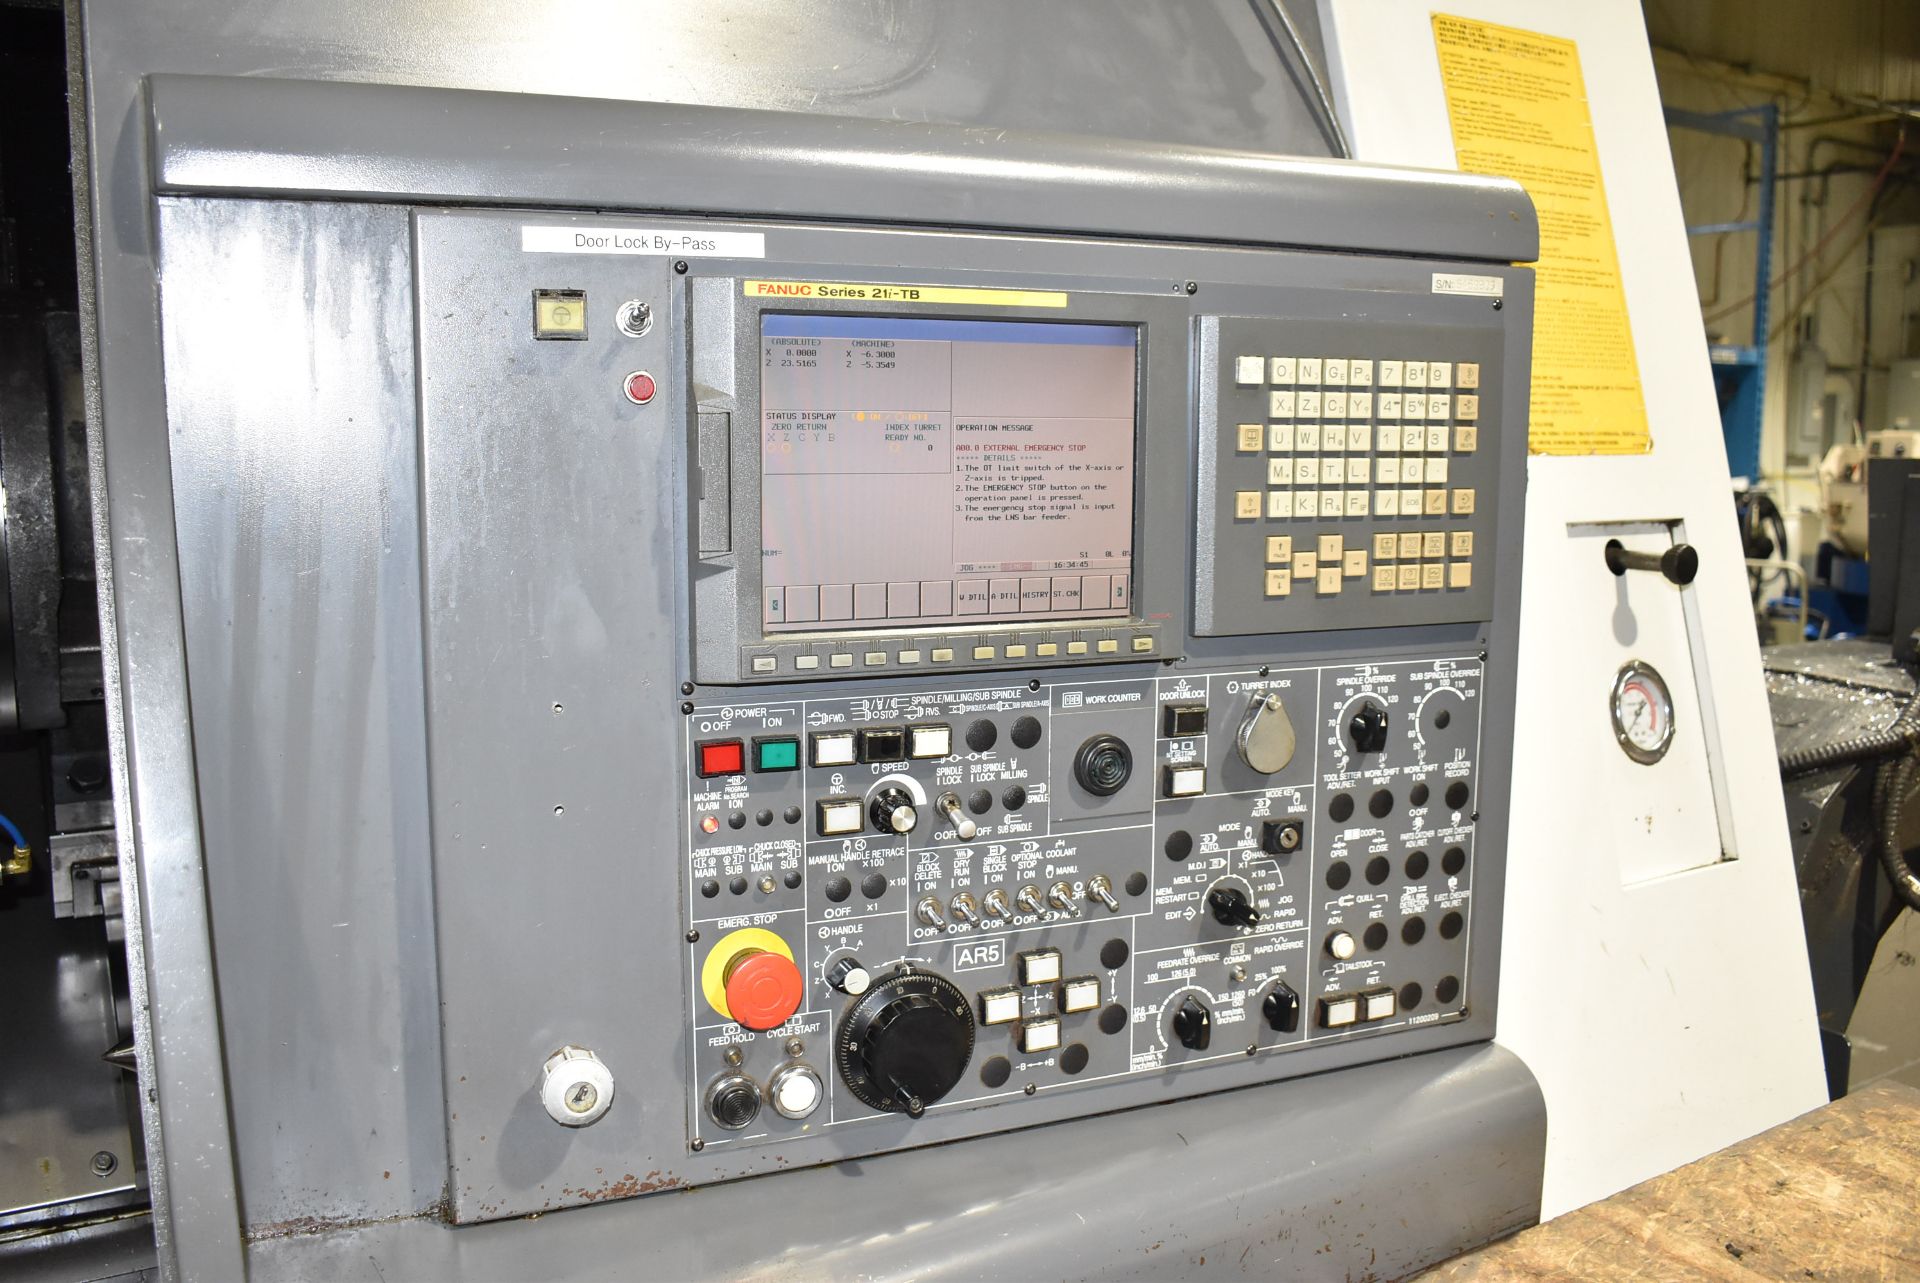 NAKAMURA-TOME (2009) SC-450 CNC TURNING CENTER WITH FANUC SERIES 21I-TB CNC CONTROL, 31.88" SWING - Image 6 of 13